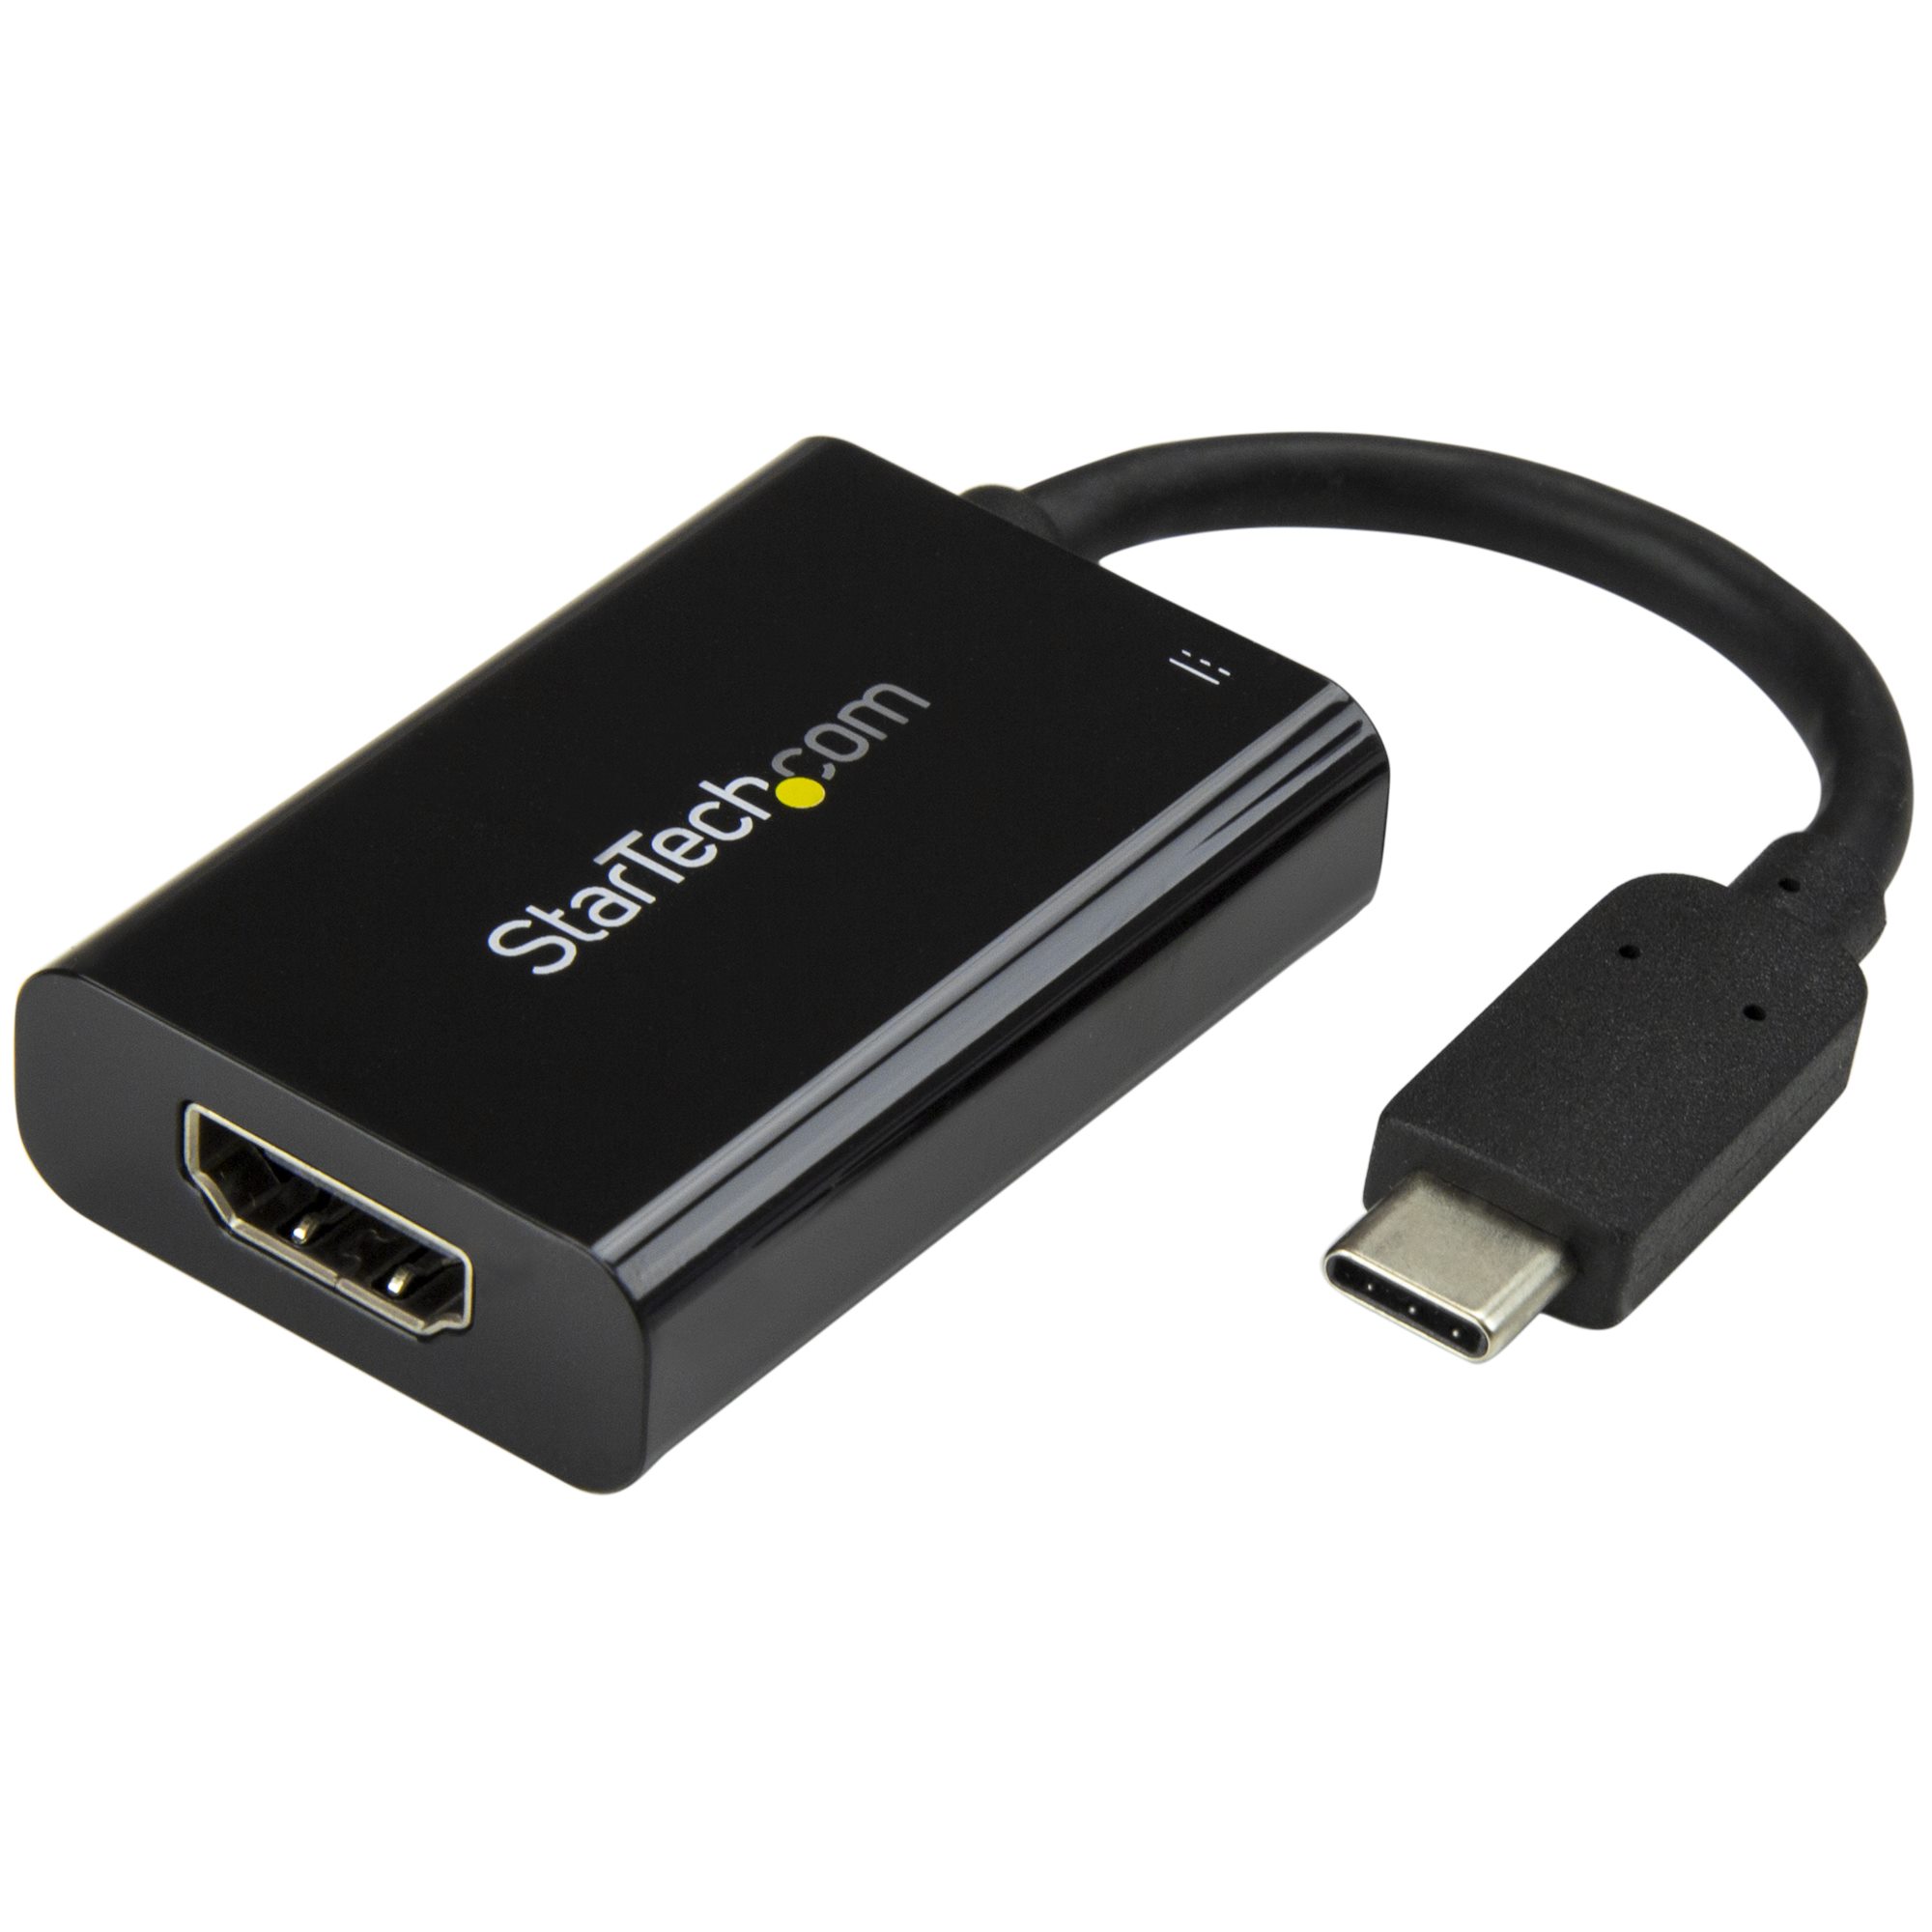 Startech USB-C to HDMI Adapter with Power Delivery CDP2HDUCP